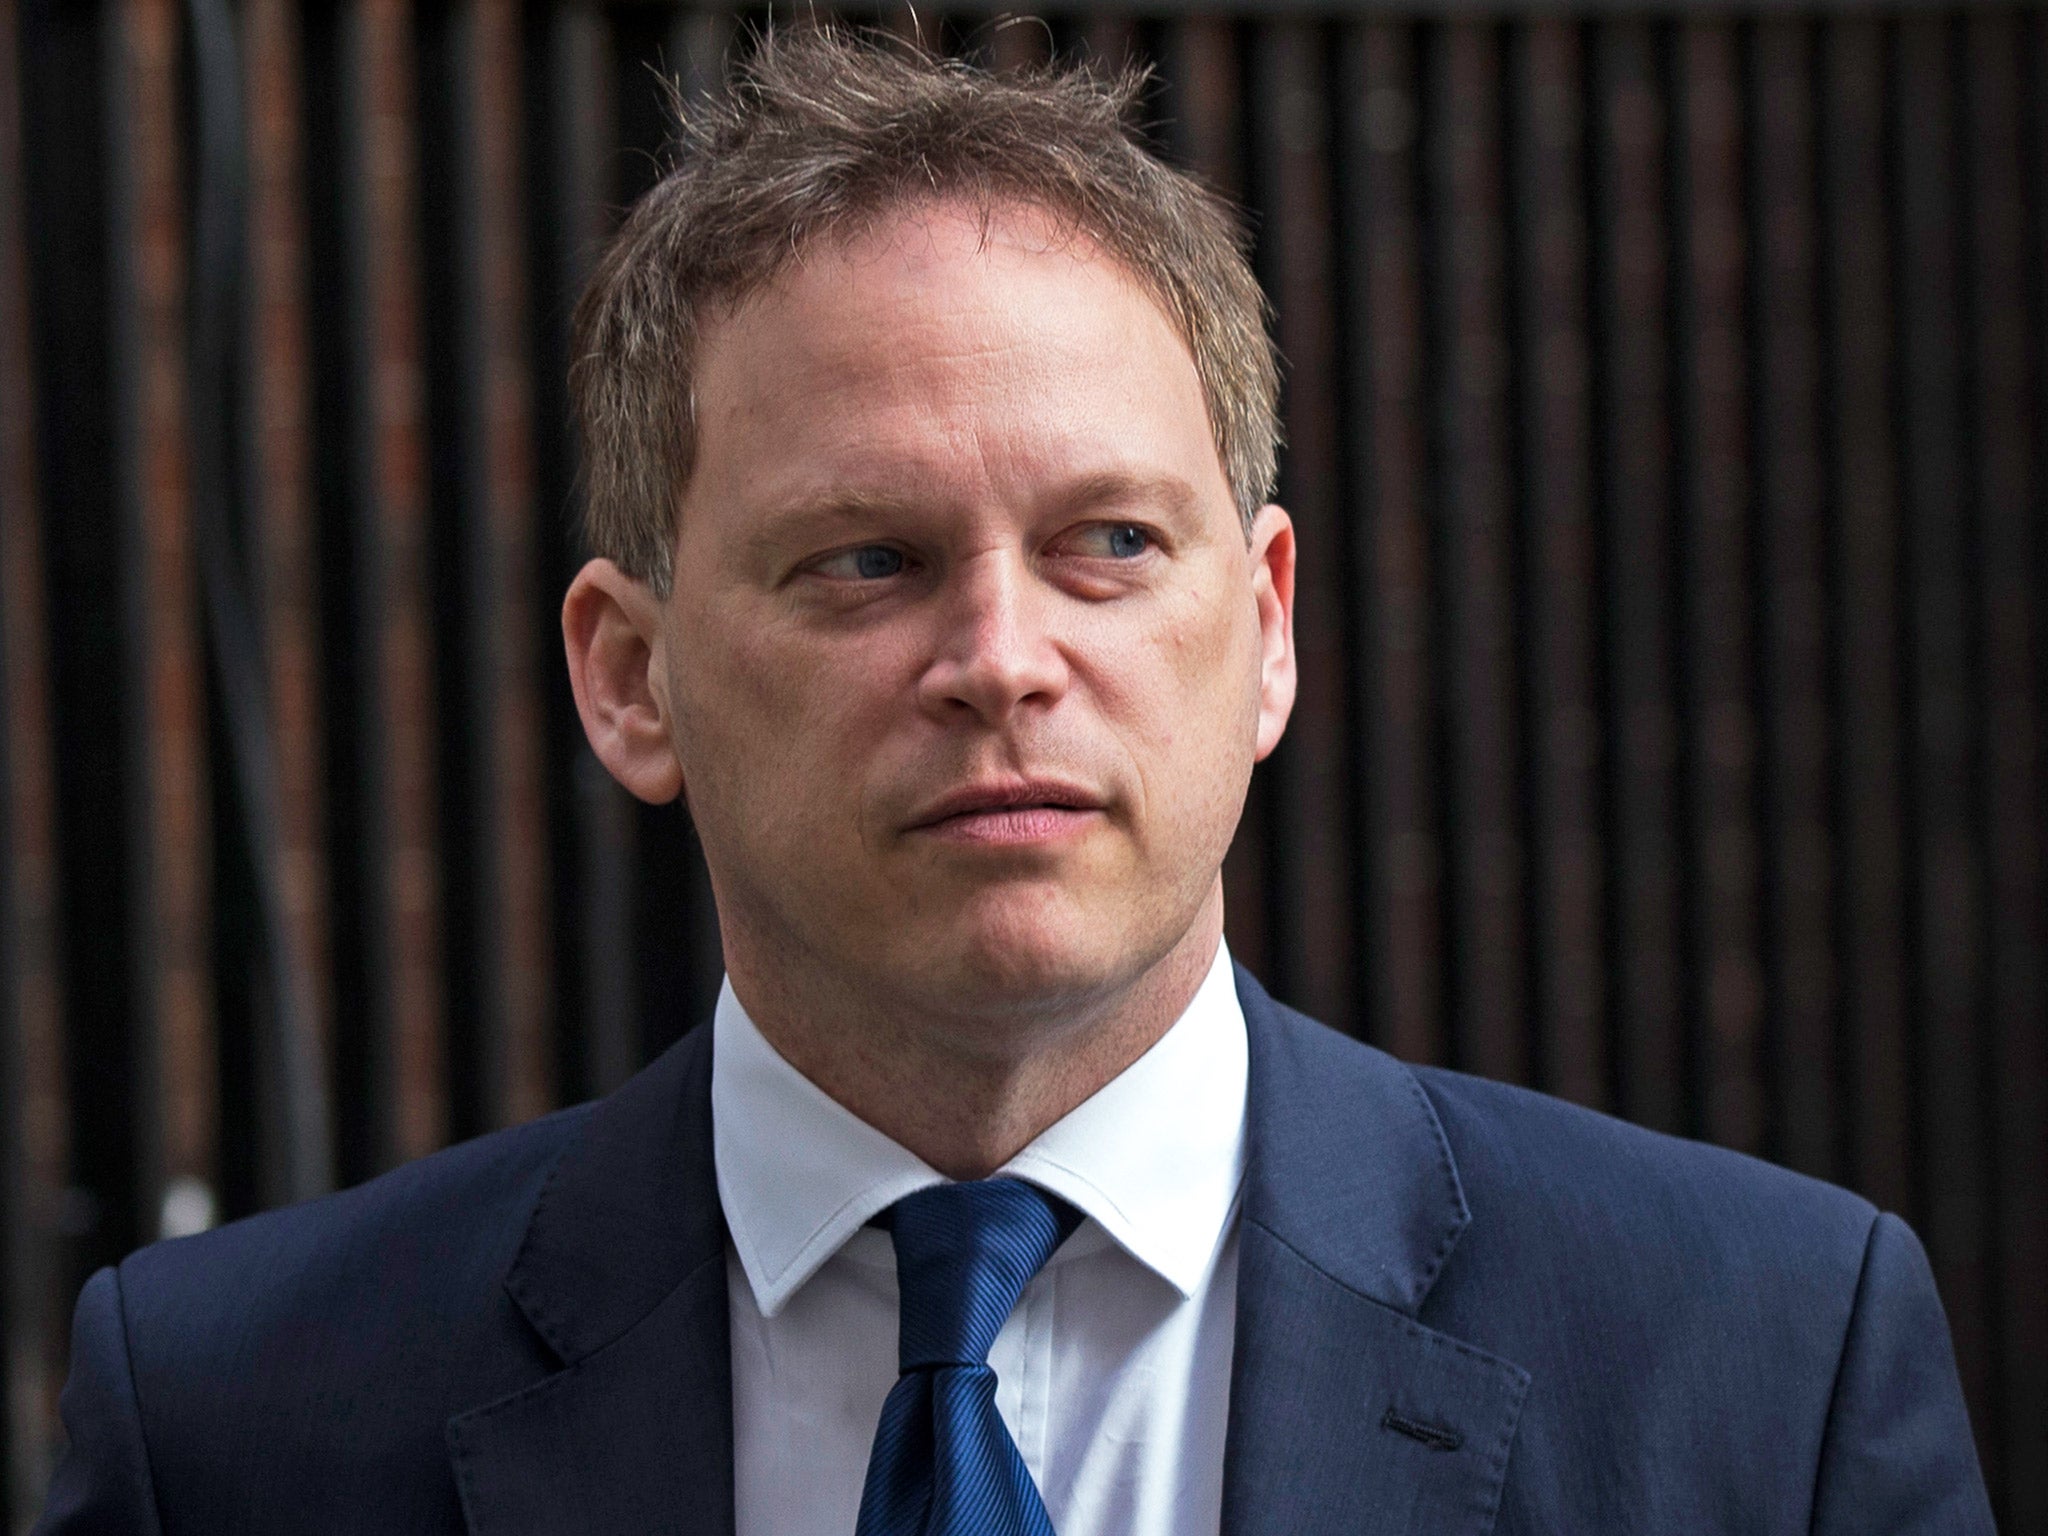 Grant Shapps has denied any involvement with the Contribsx account